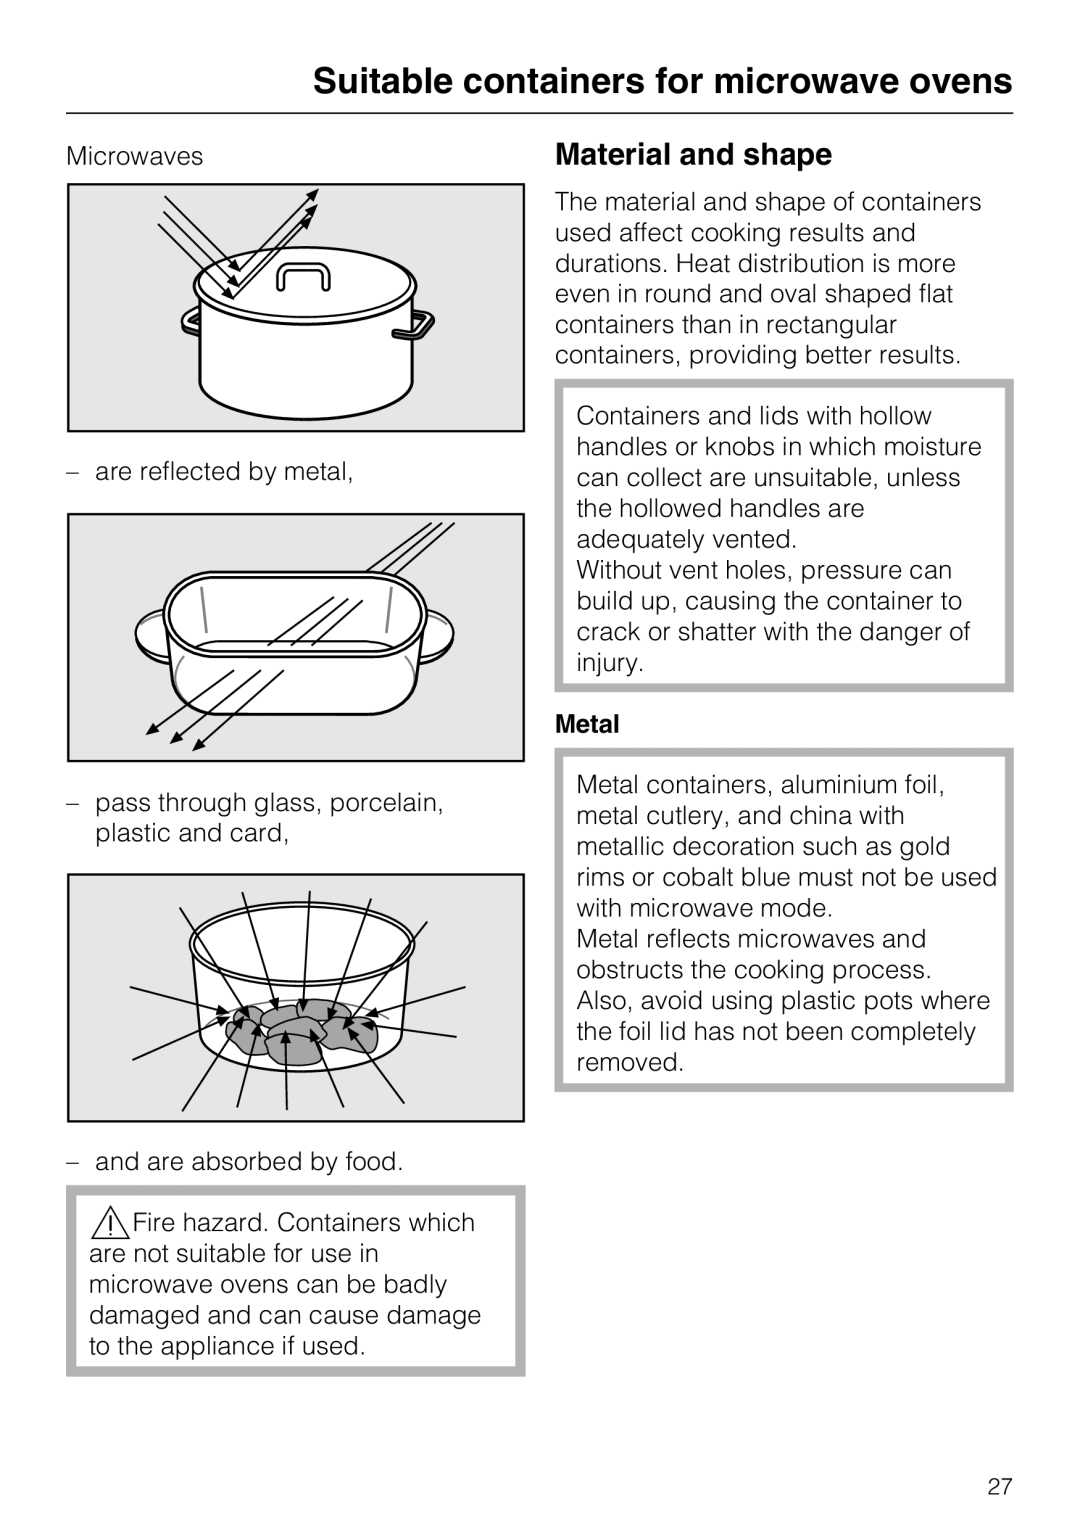 Miele 09 919 100 operating instructions Suitable containers for microwave ovens, Material and shape, Metal 